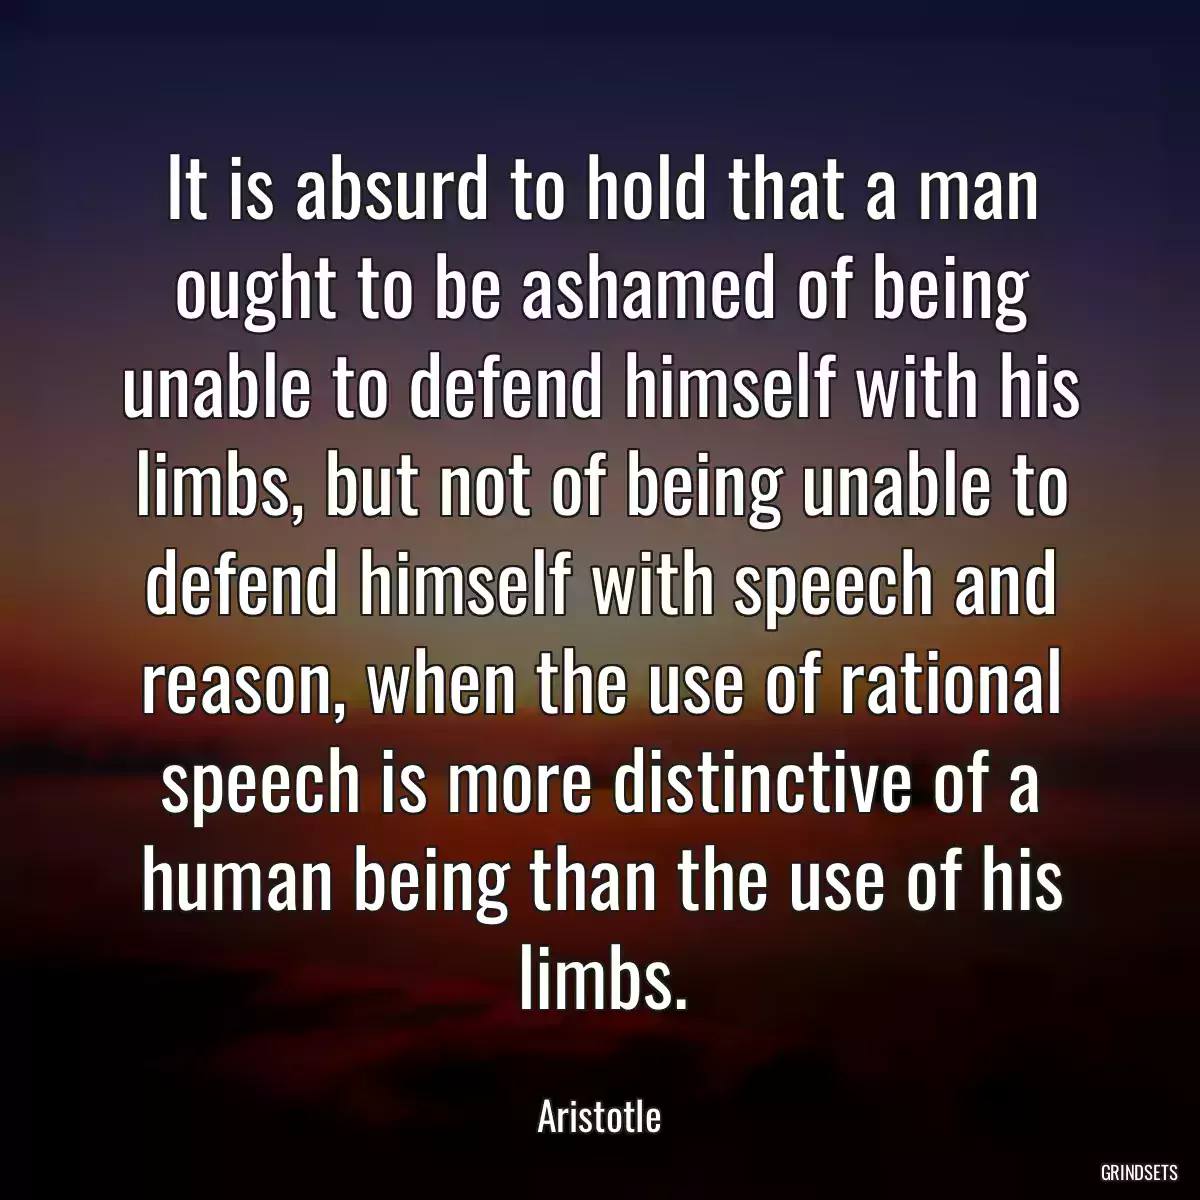 It is absurd to hold that a man ought to be ashamed of being unable to defend himself with his limbs, but not of being unable to defend himself with speech and reason, when the use of rational speech is more distinctive of a human being than the use of his limbs.